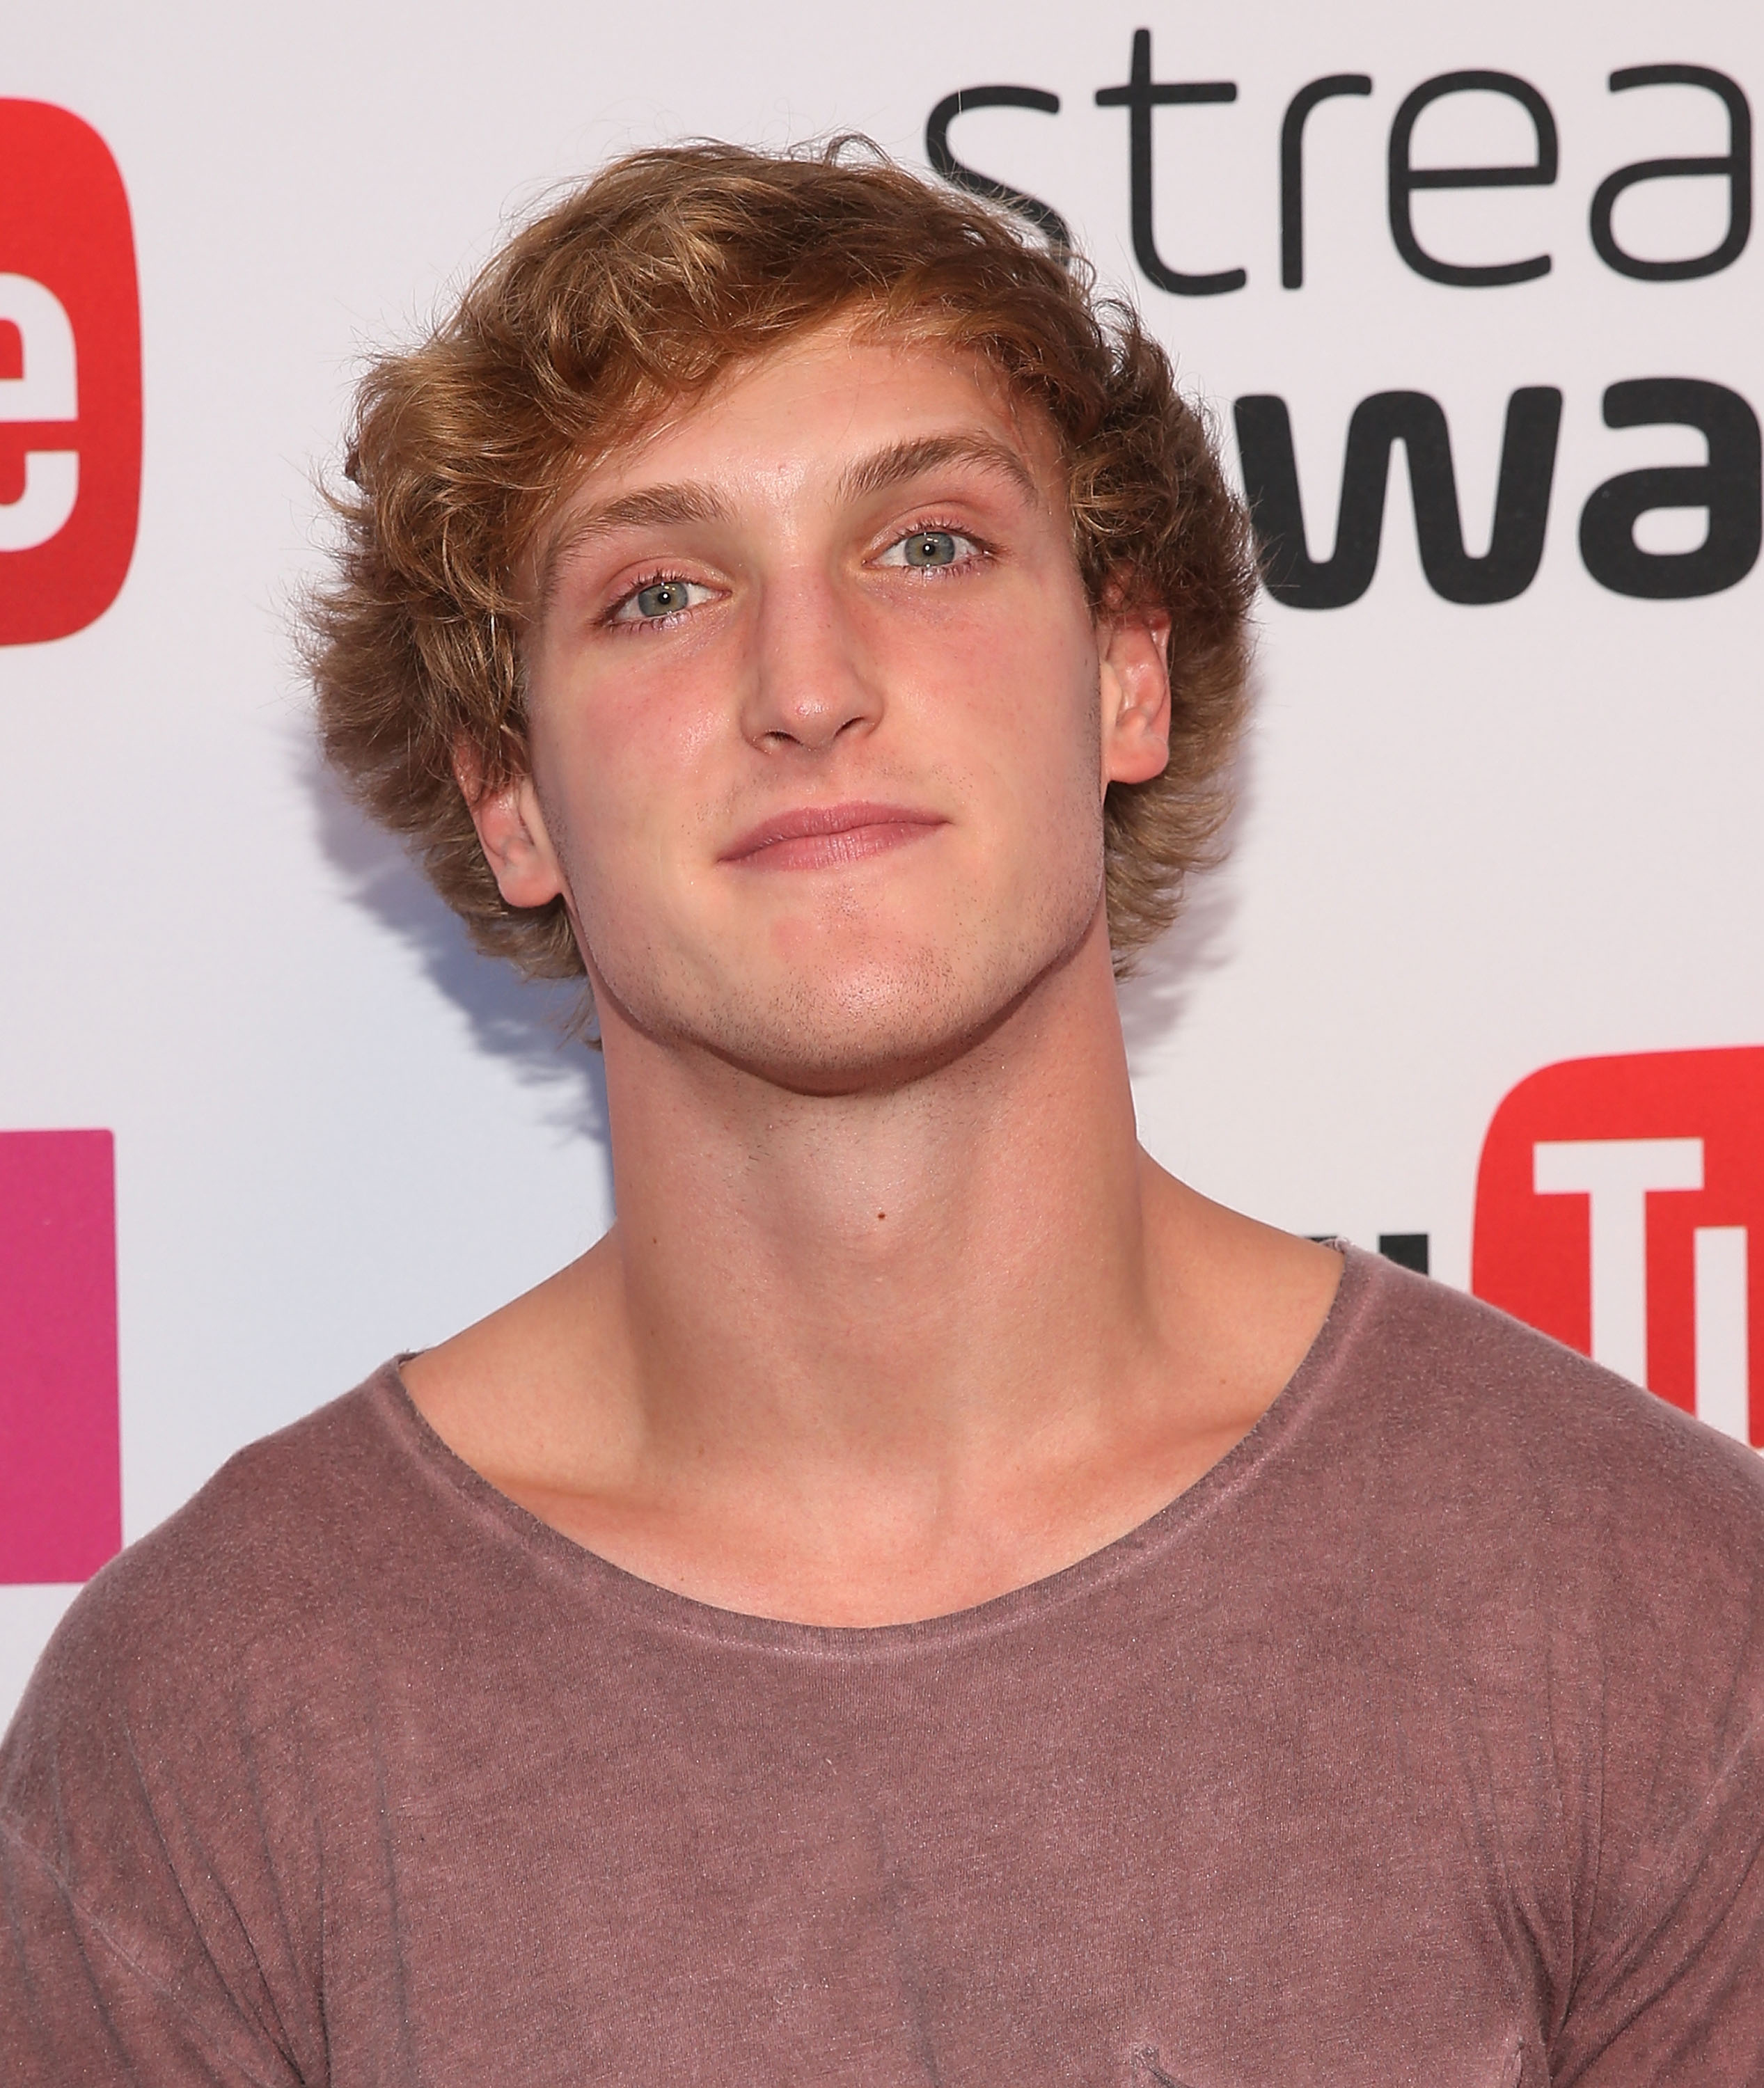 Logan Paul wallpapers for iPhone, Android.